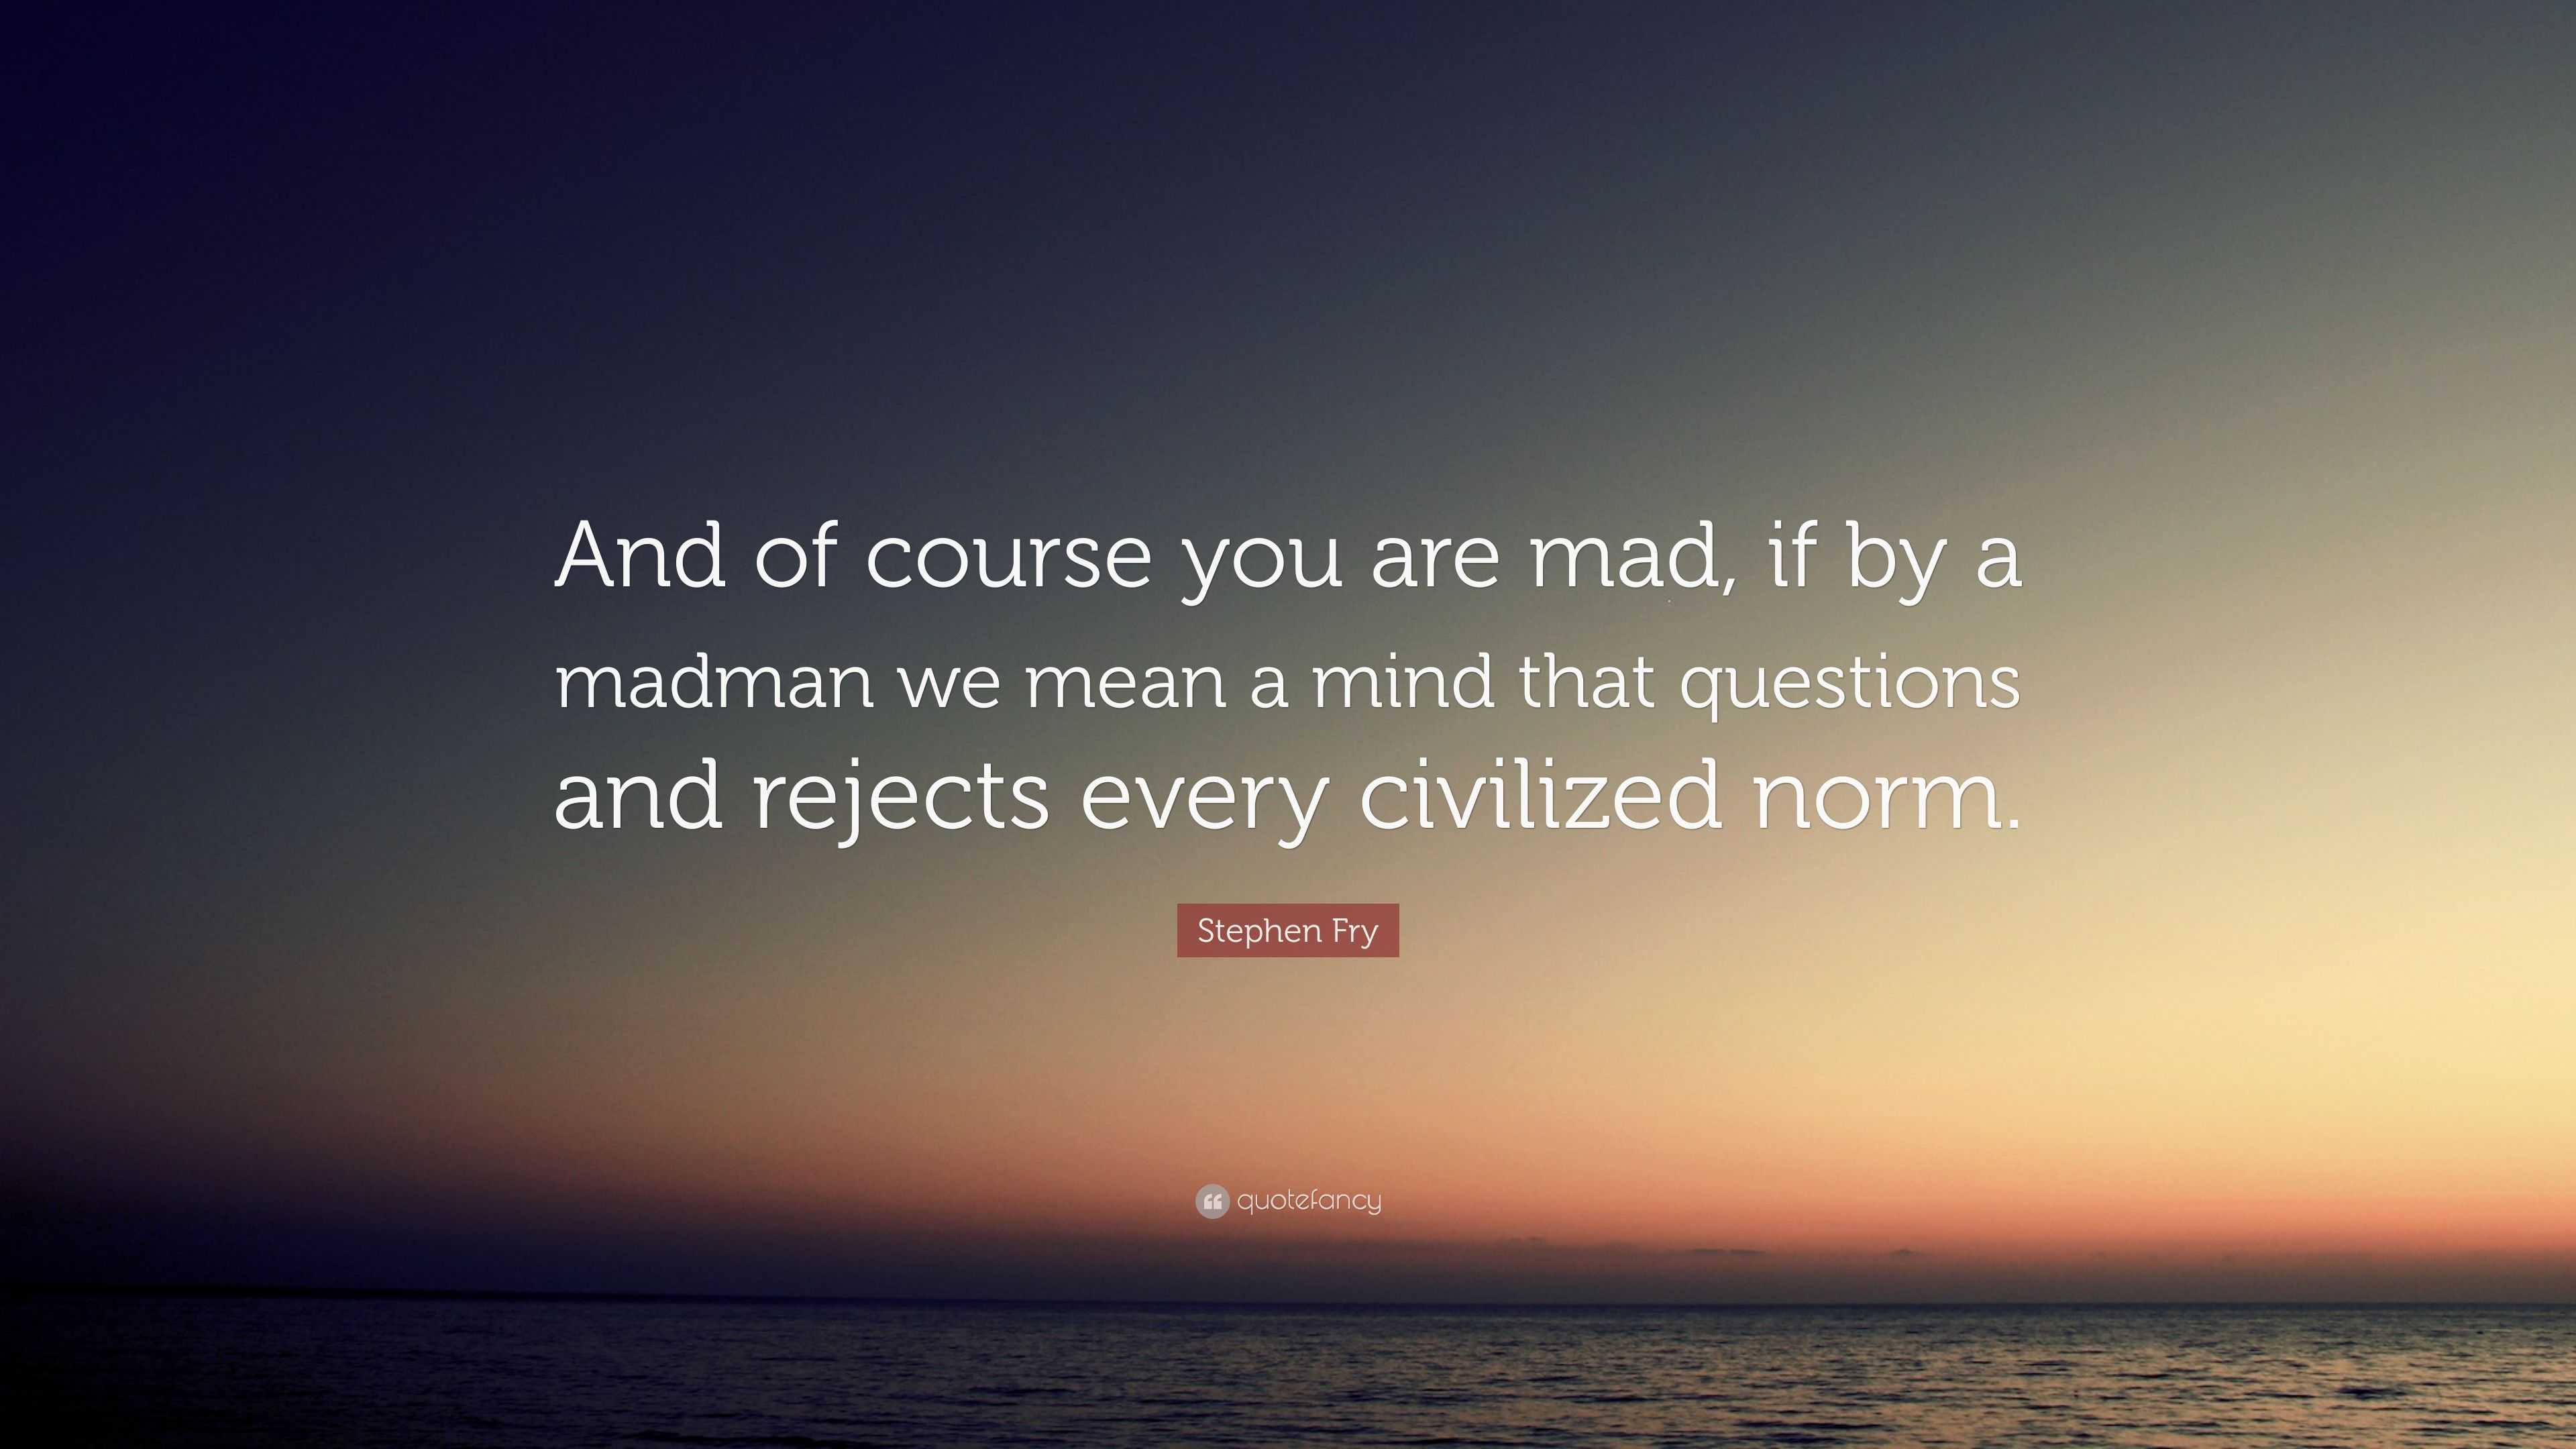 Stephen Fry Quote: “And of course you are mad, if by a madman we